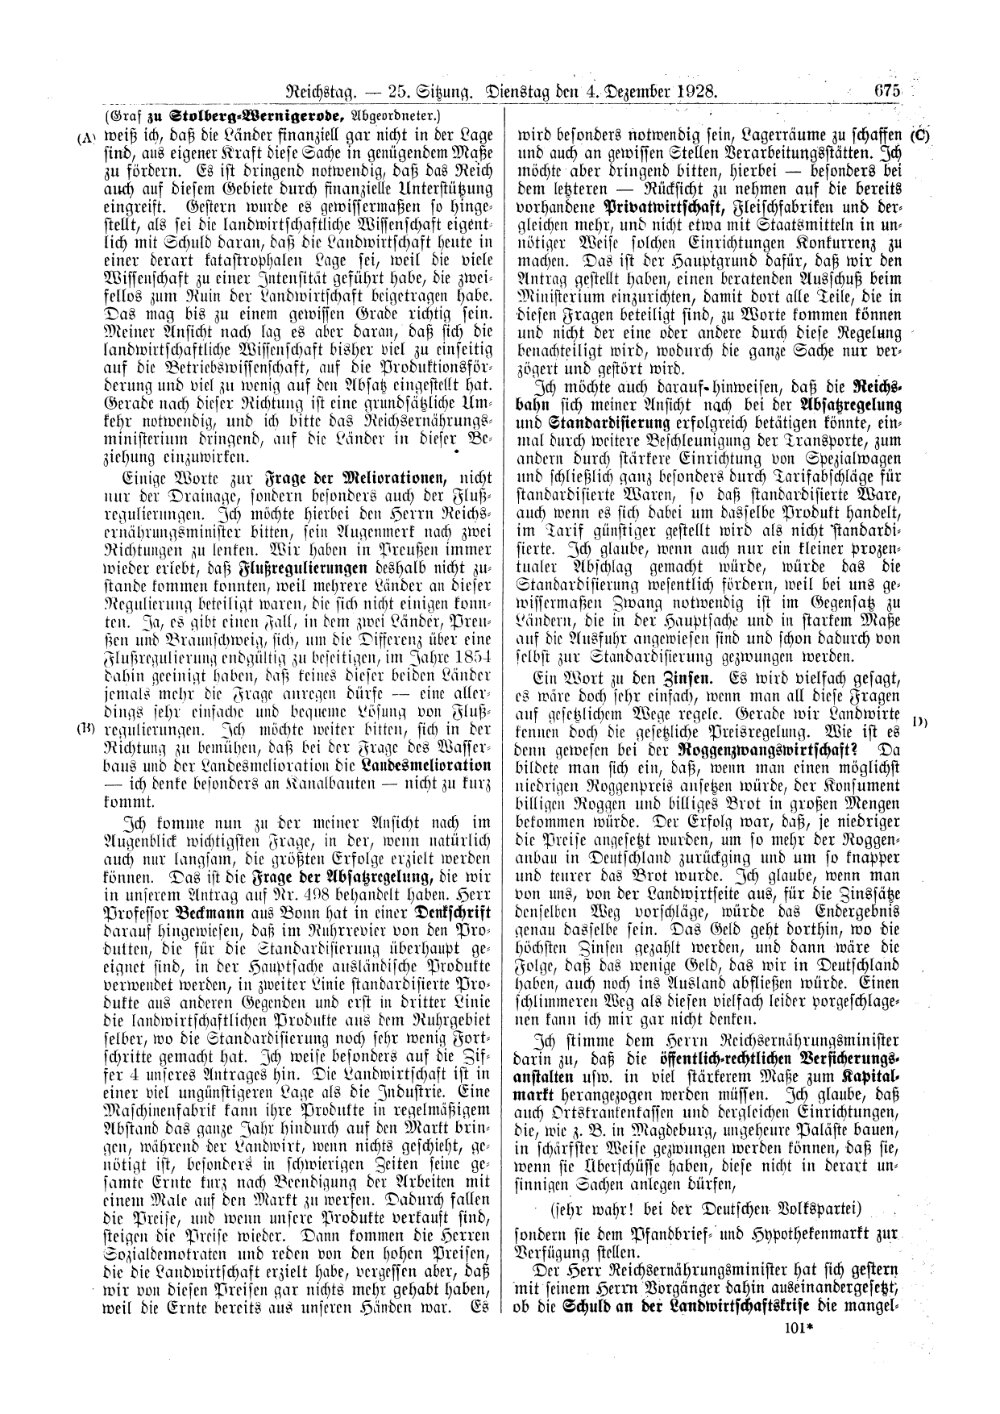 Scan of page 675